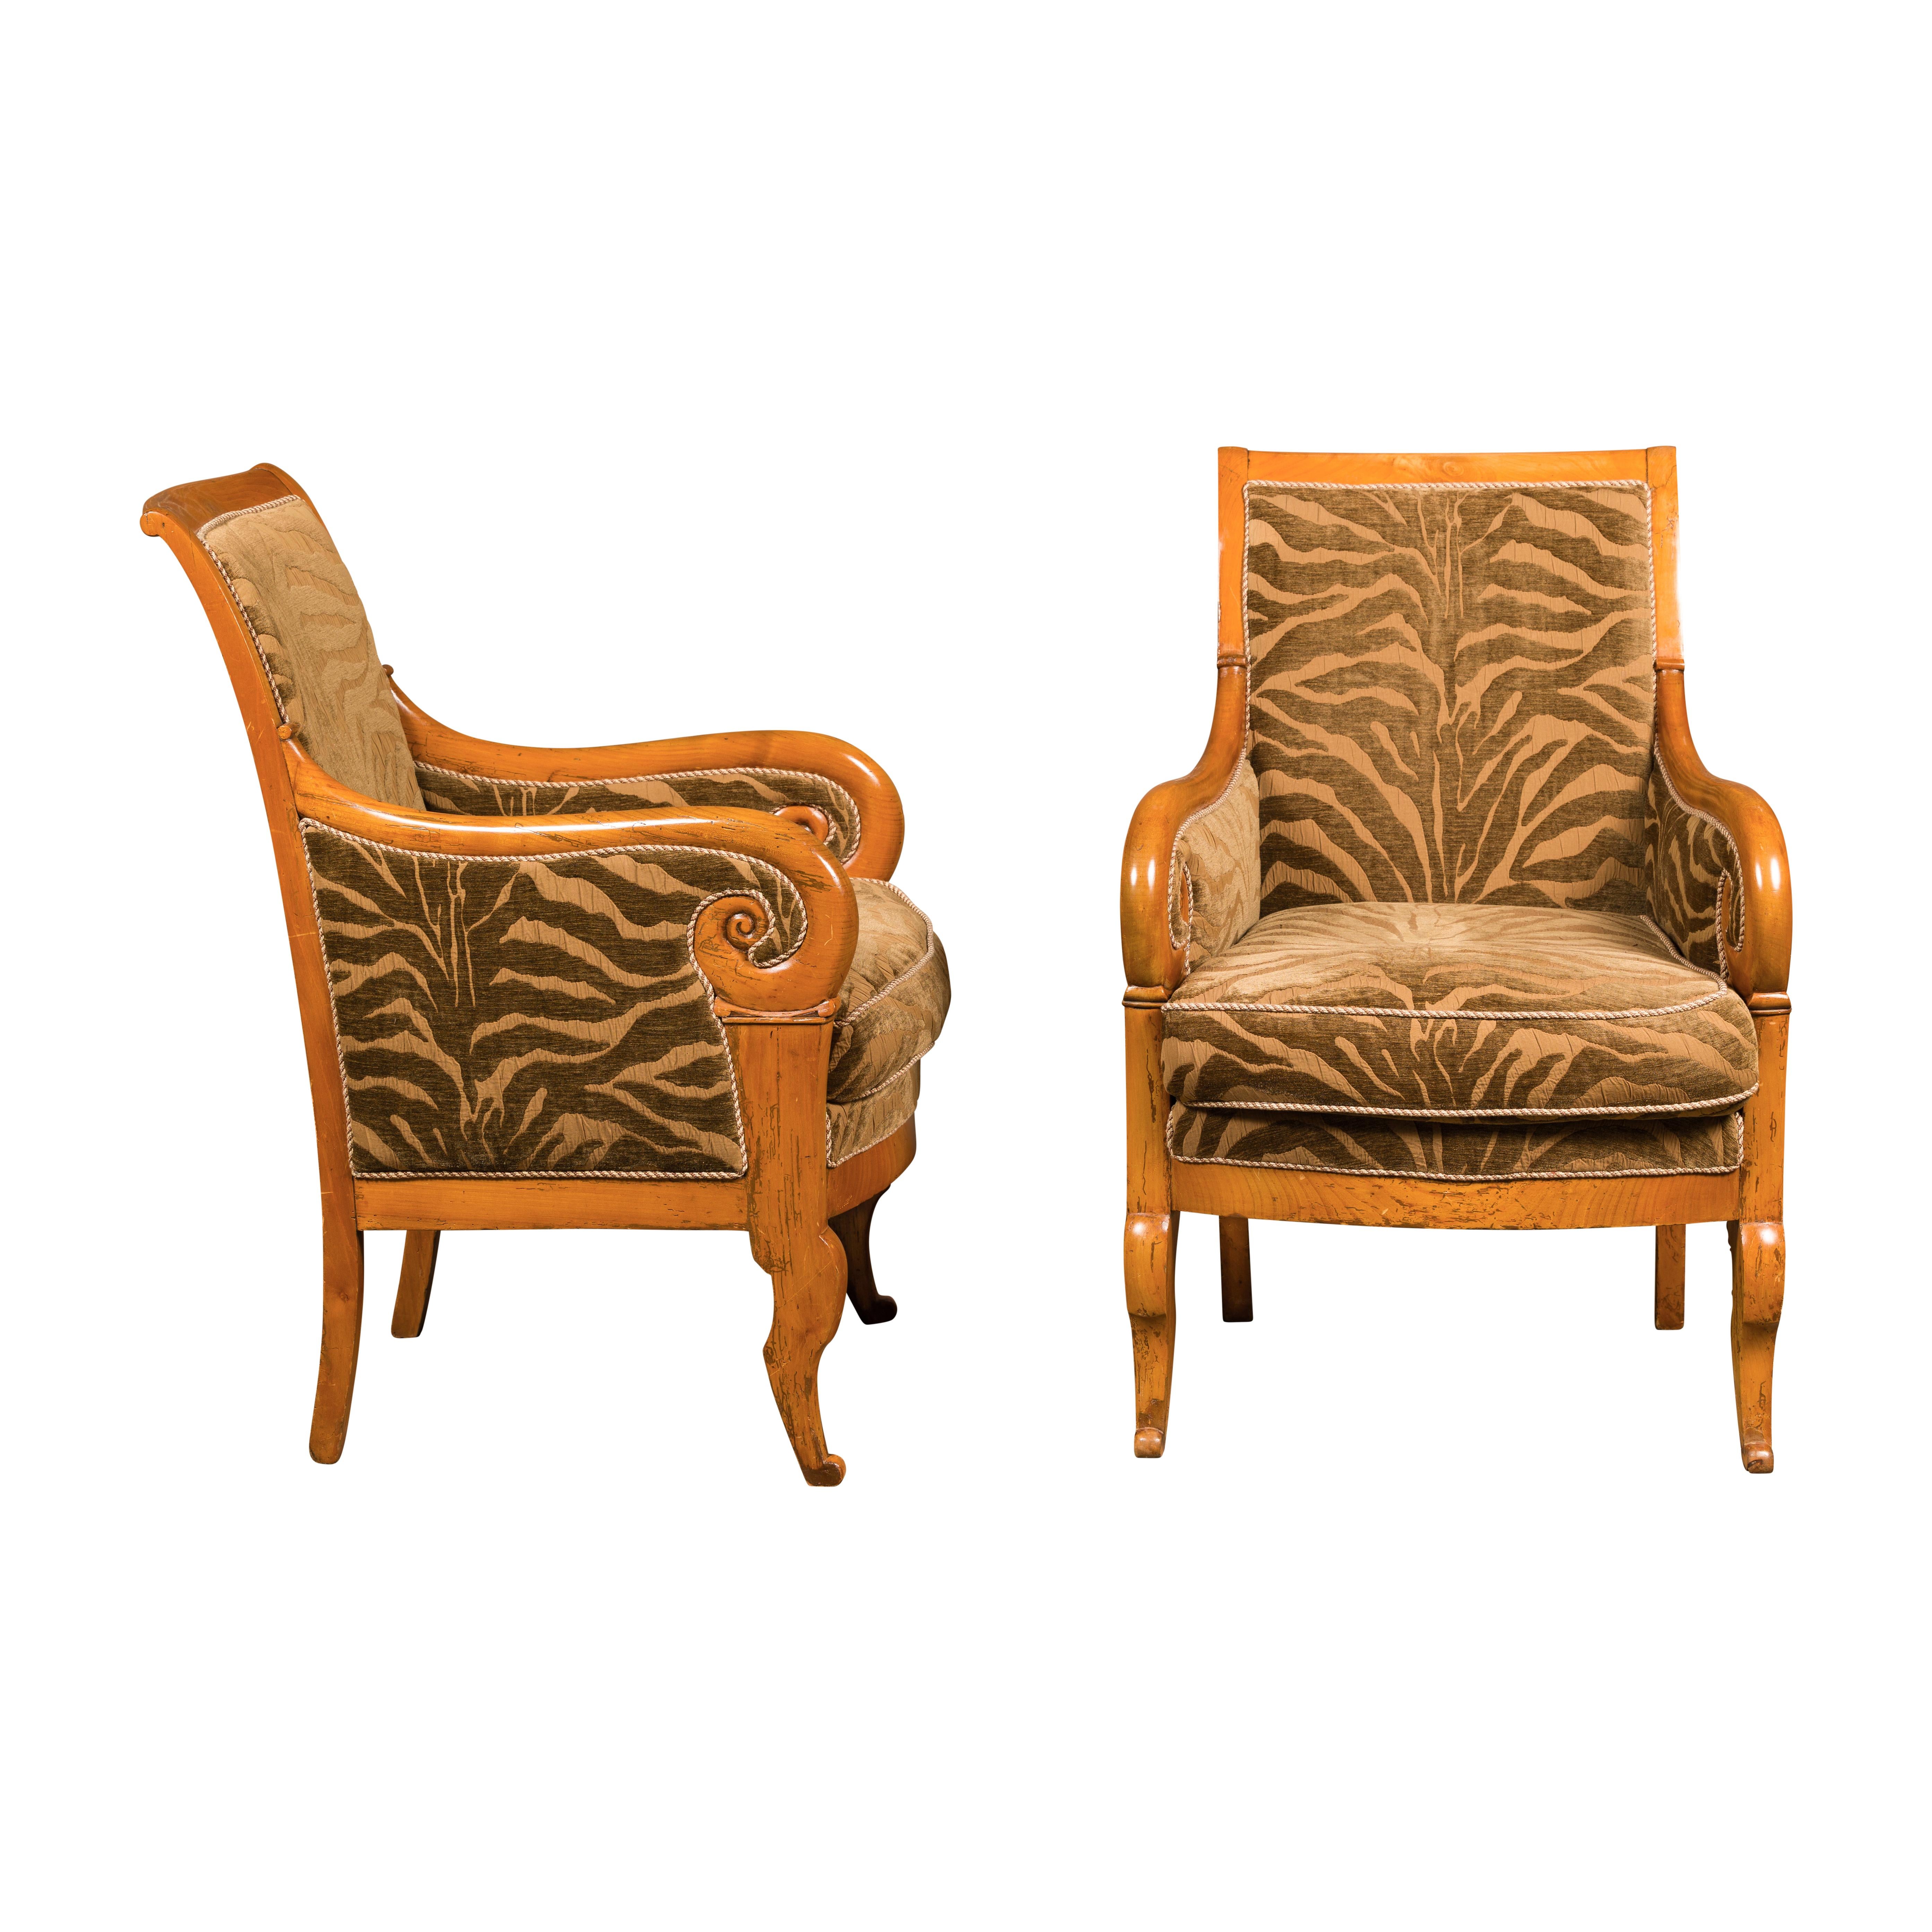 French Walnut 19th Century Bergère Chairs with Carved Arms and Zebra Upholstery For Sale 11